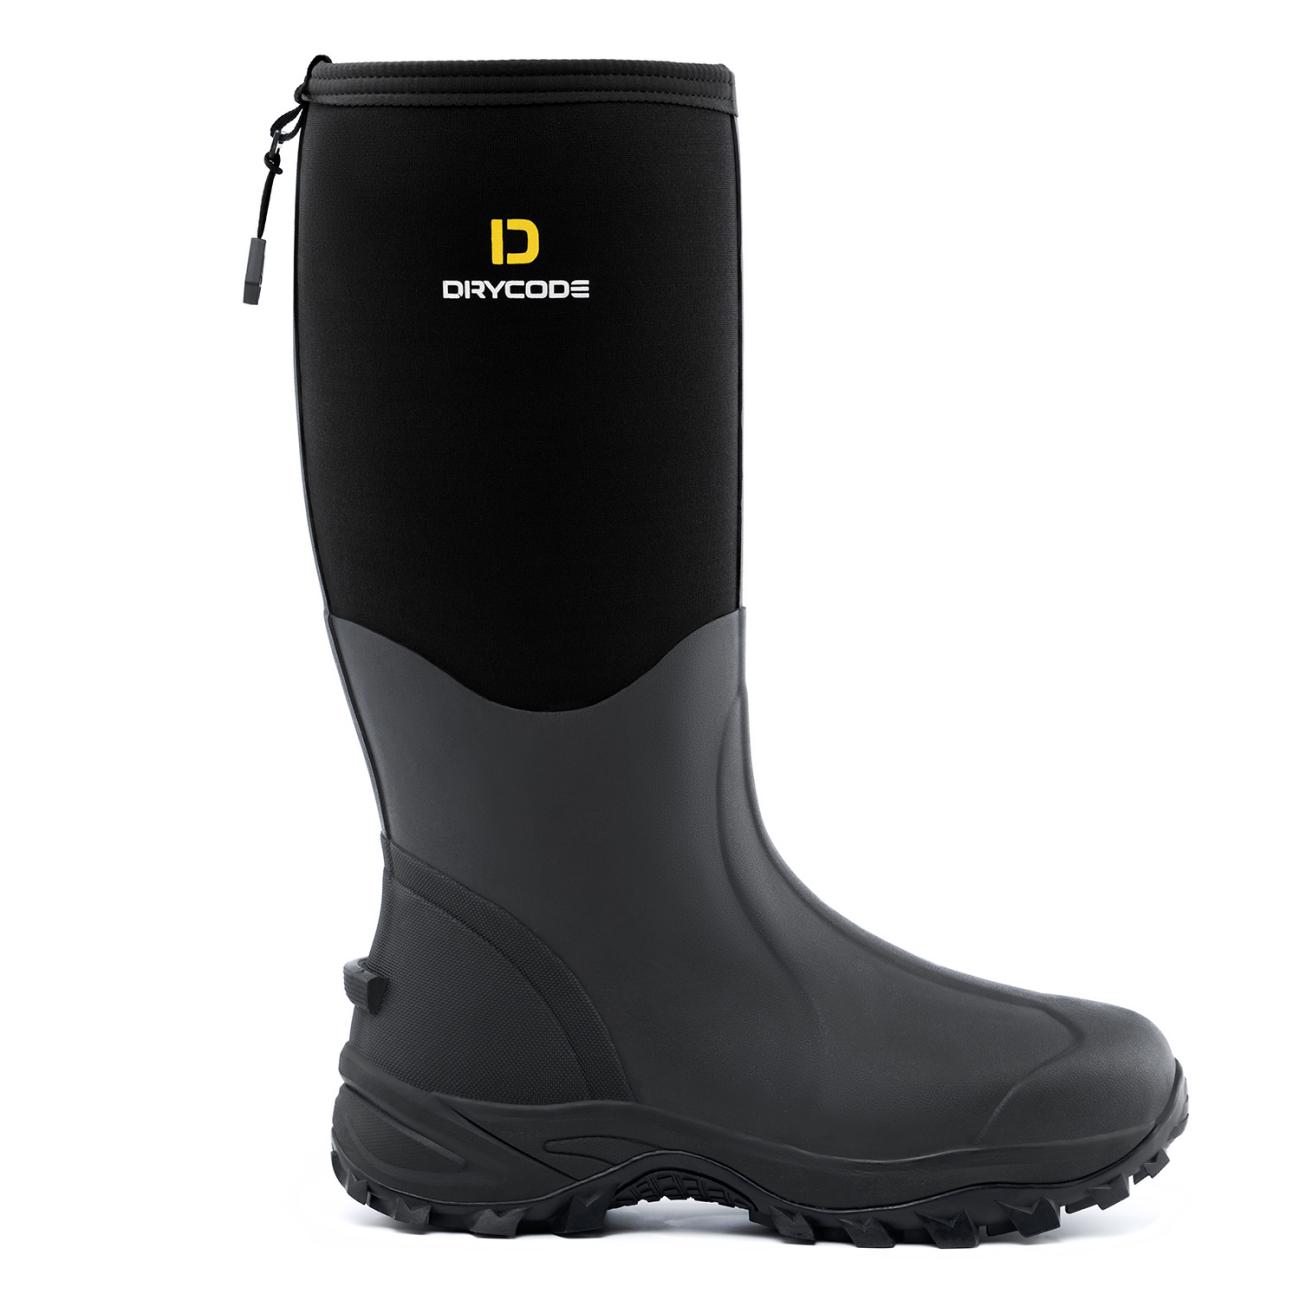 New Rubber Fishing Boots Men Rain Boots Black Gumboots With Liner